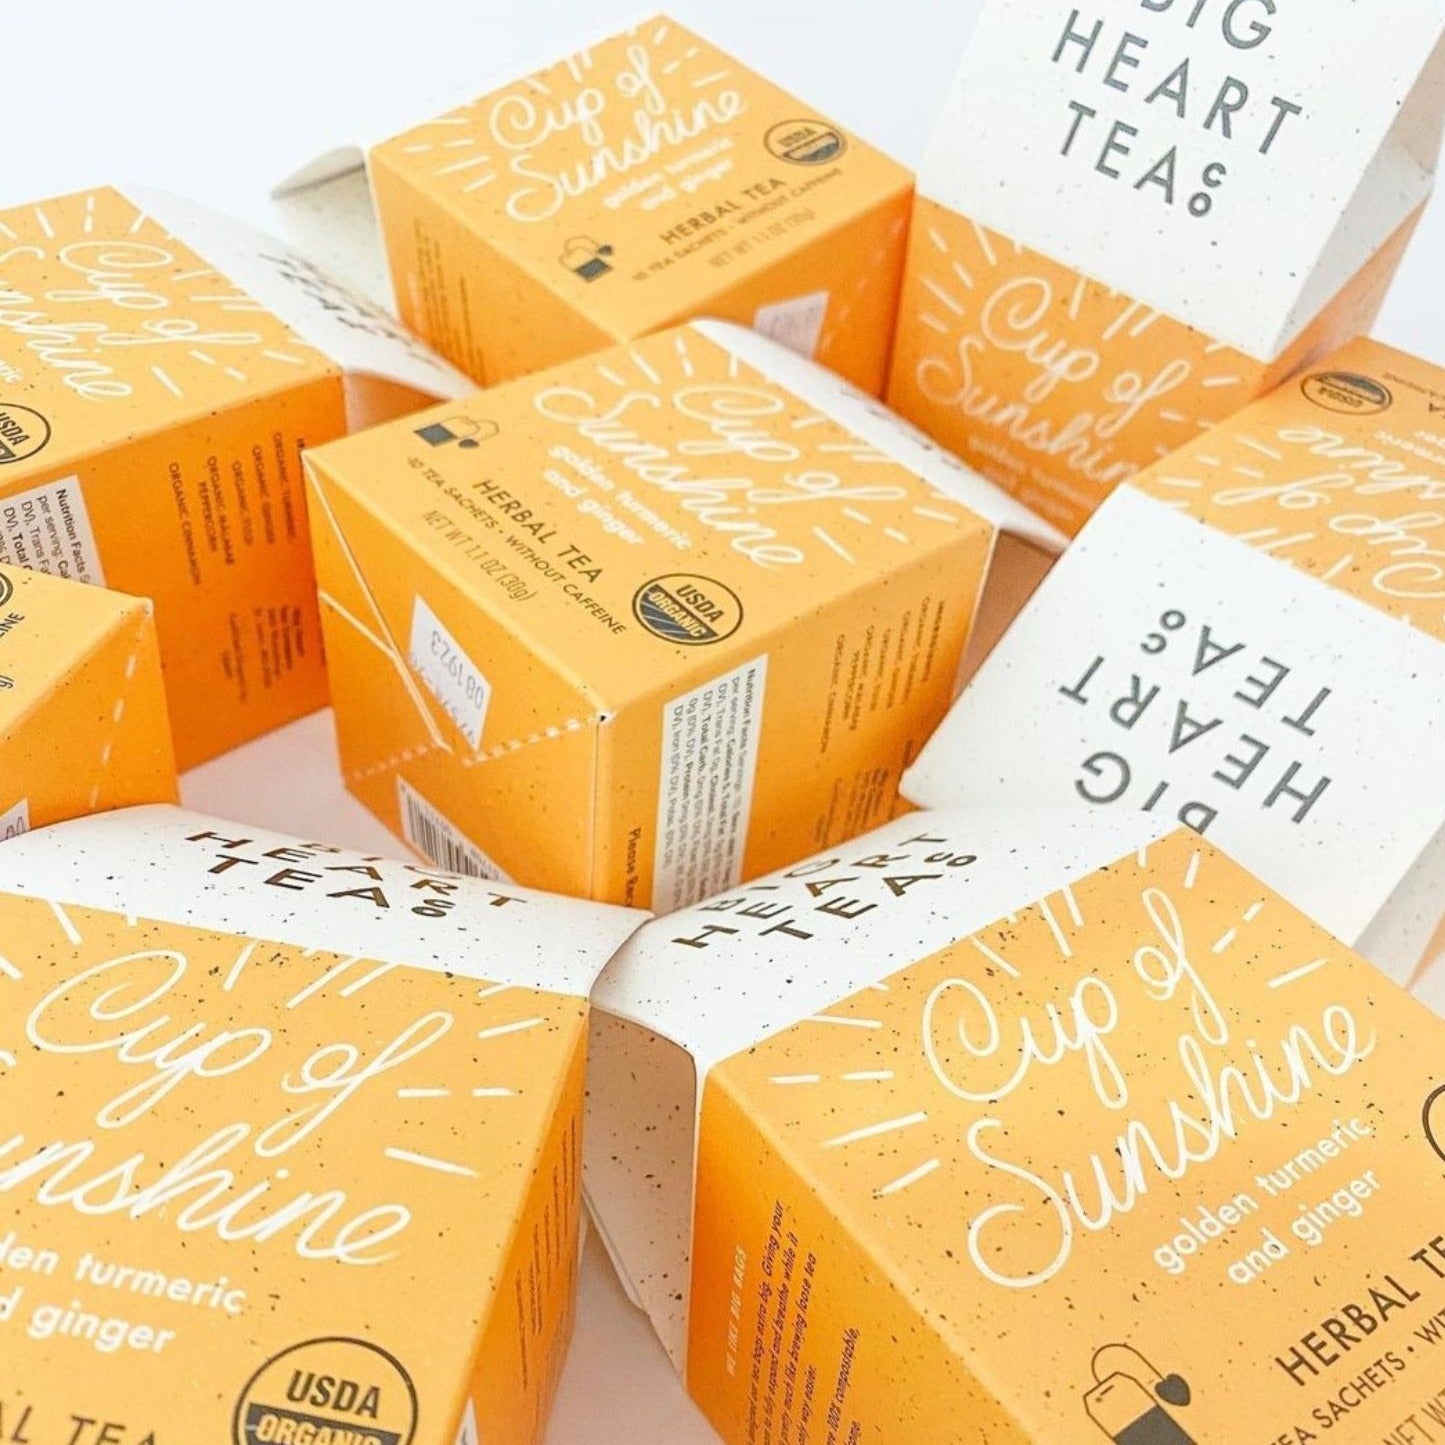 a bunch of yellow boxes of Big Heart Tea Co.'s Cup of Sunshine tea, an organic blend featuring turmeric, ginger, tulsi, Malabar peppercorn, and cinnamon. Known for its anti-inflammatory benefits, immune-boosting properties, and digestive aid.